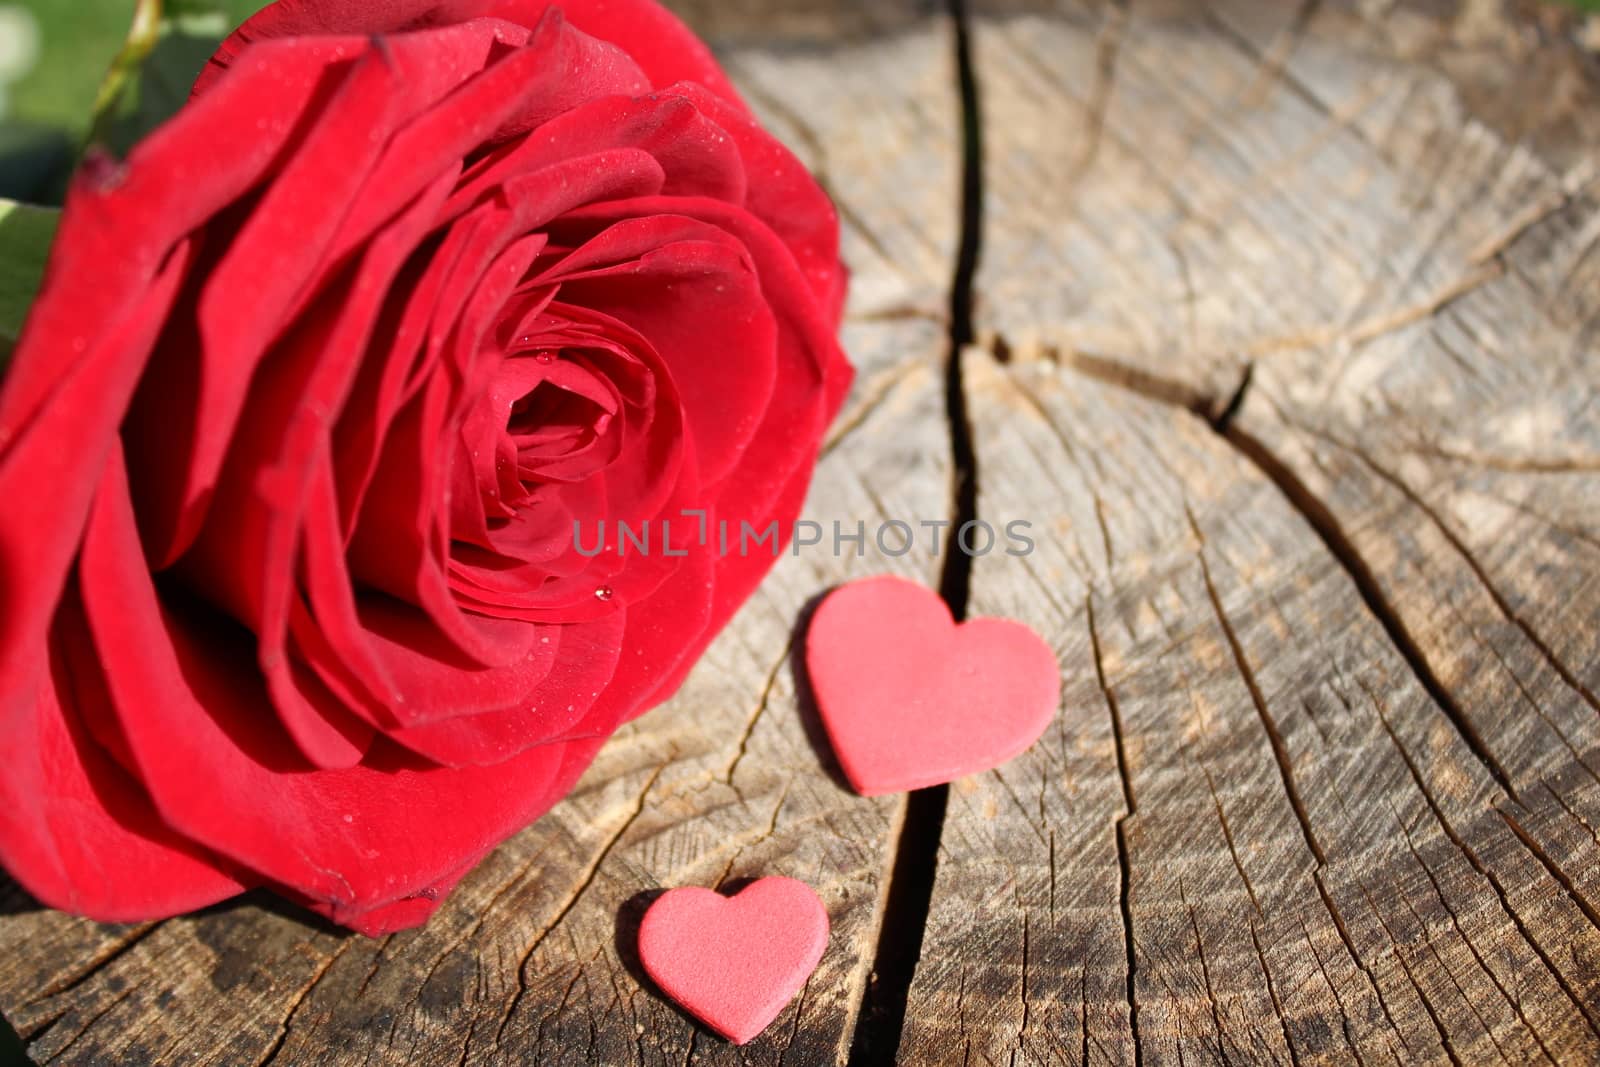 The picture shows a red rose with hearts on a tree trunk.